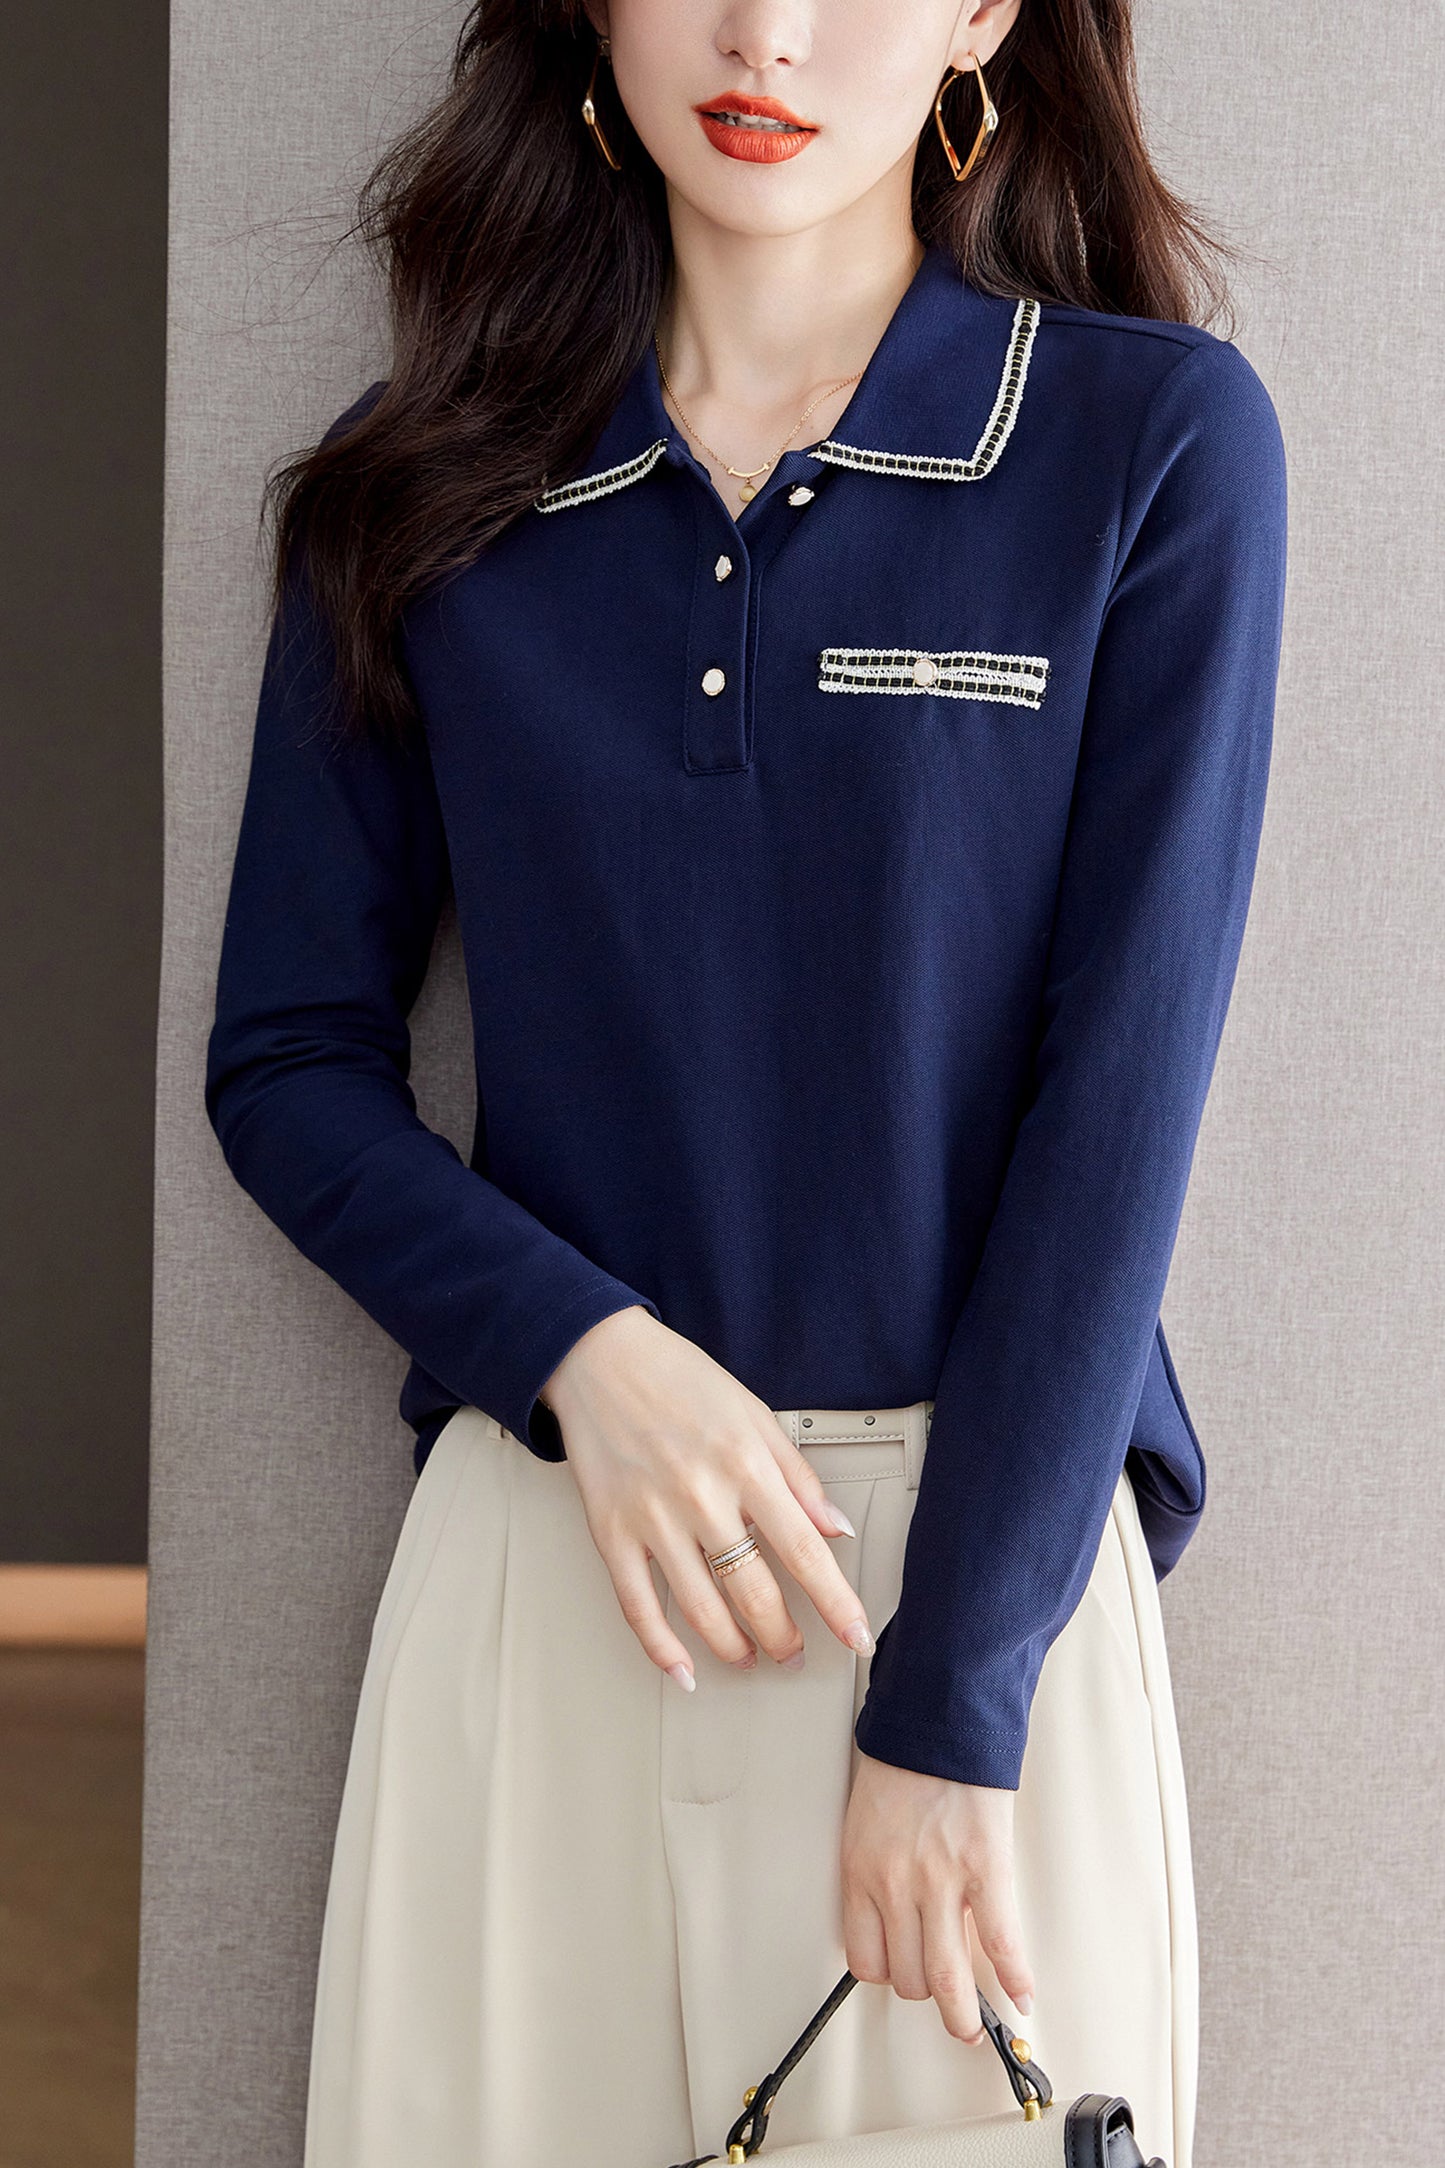 Women's Casual Polo Sweater Long Sleeve Knit Pullover Tops